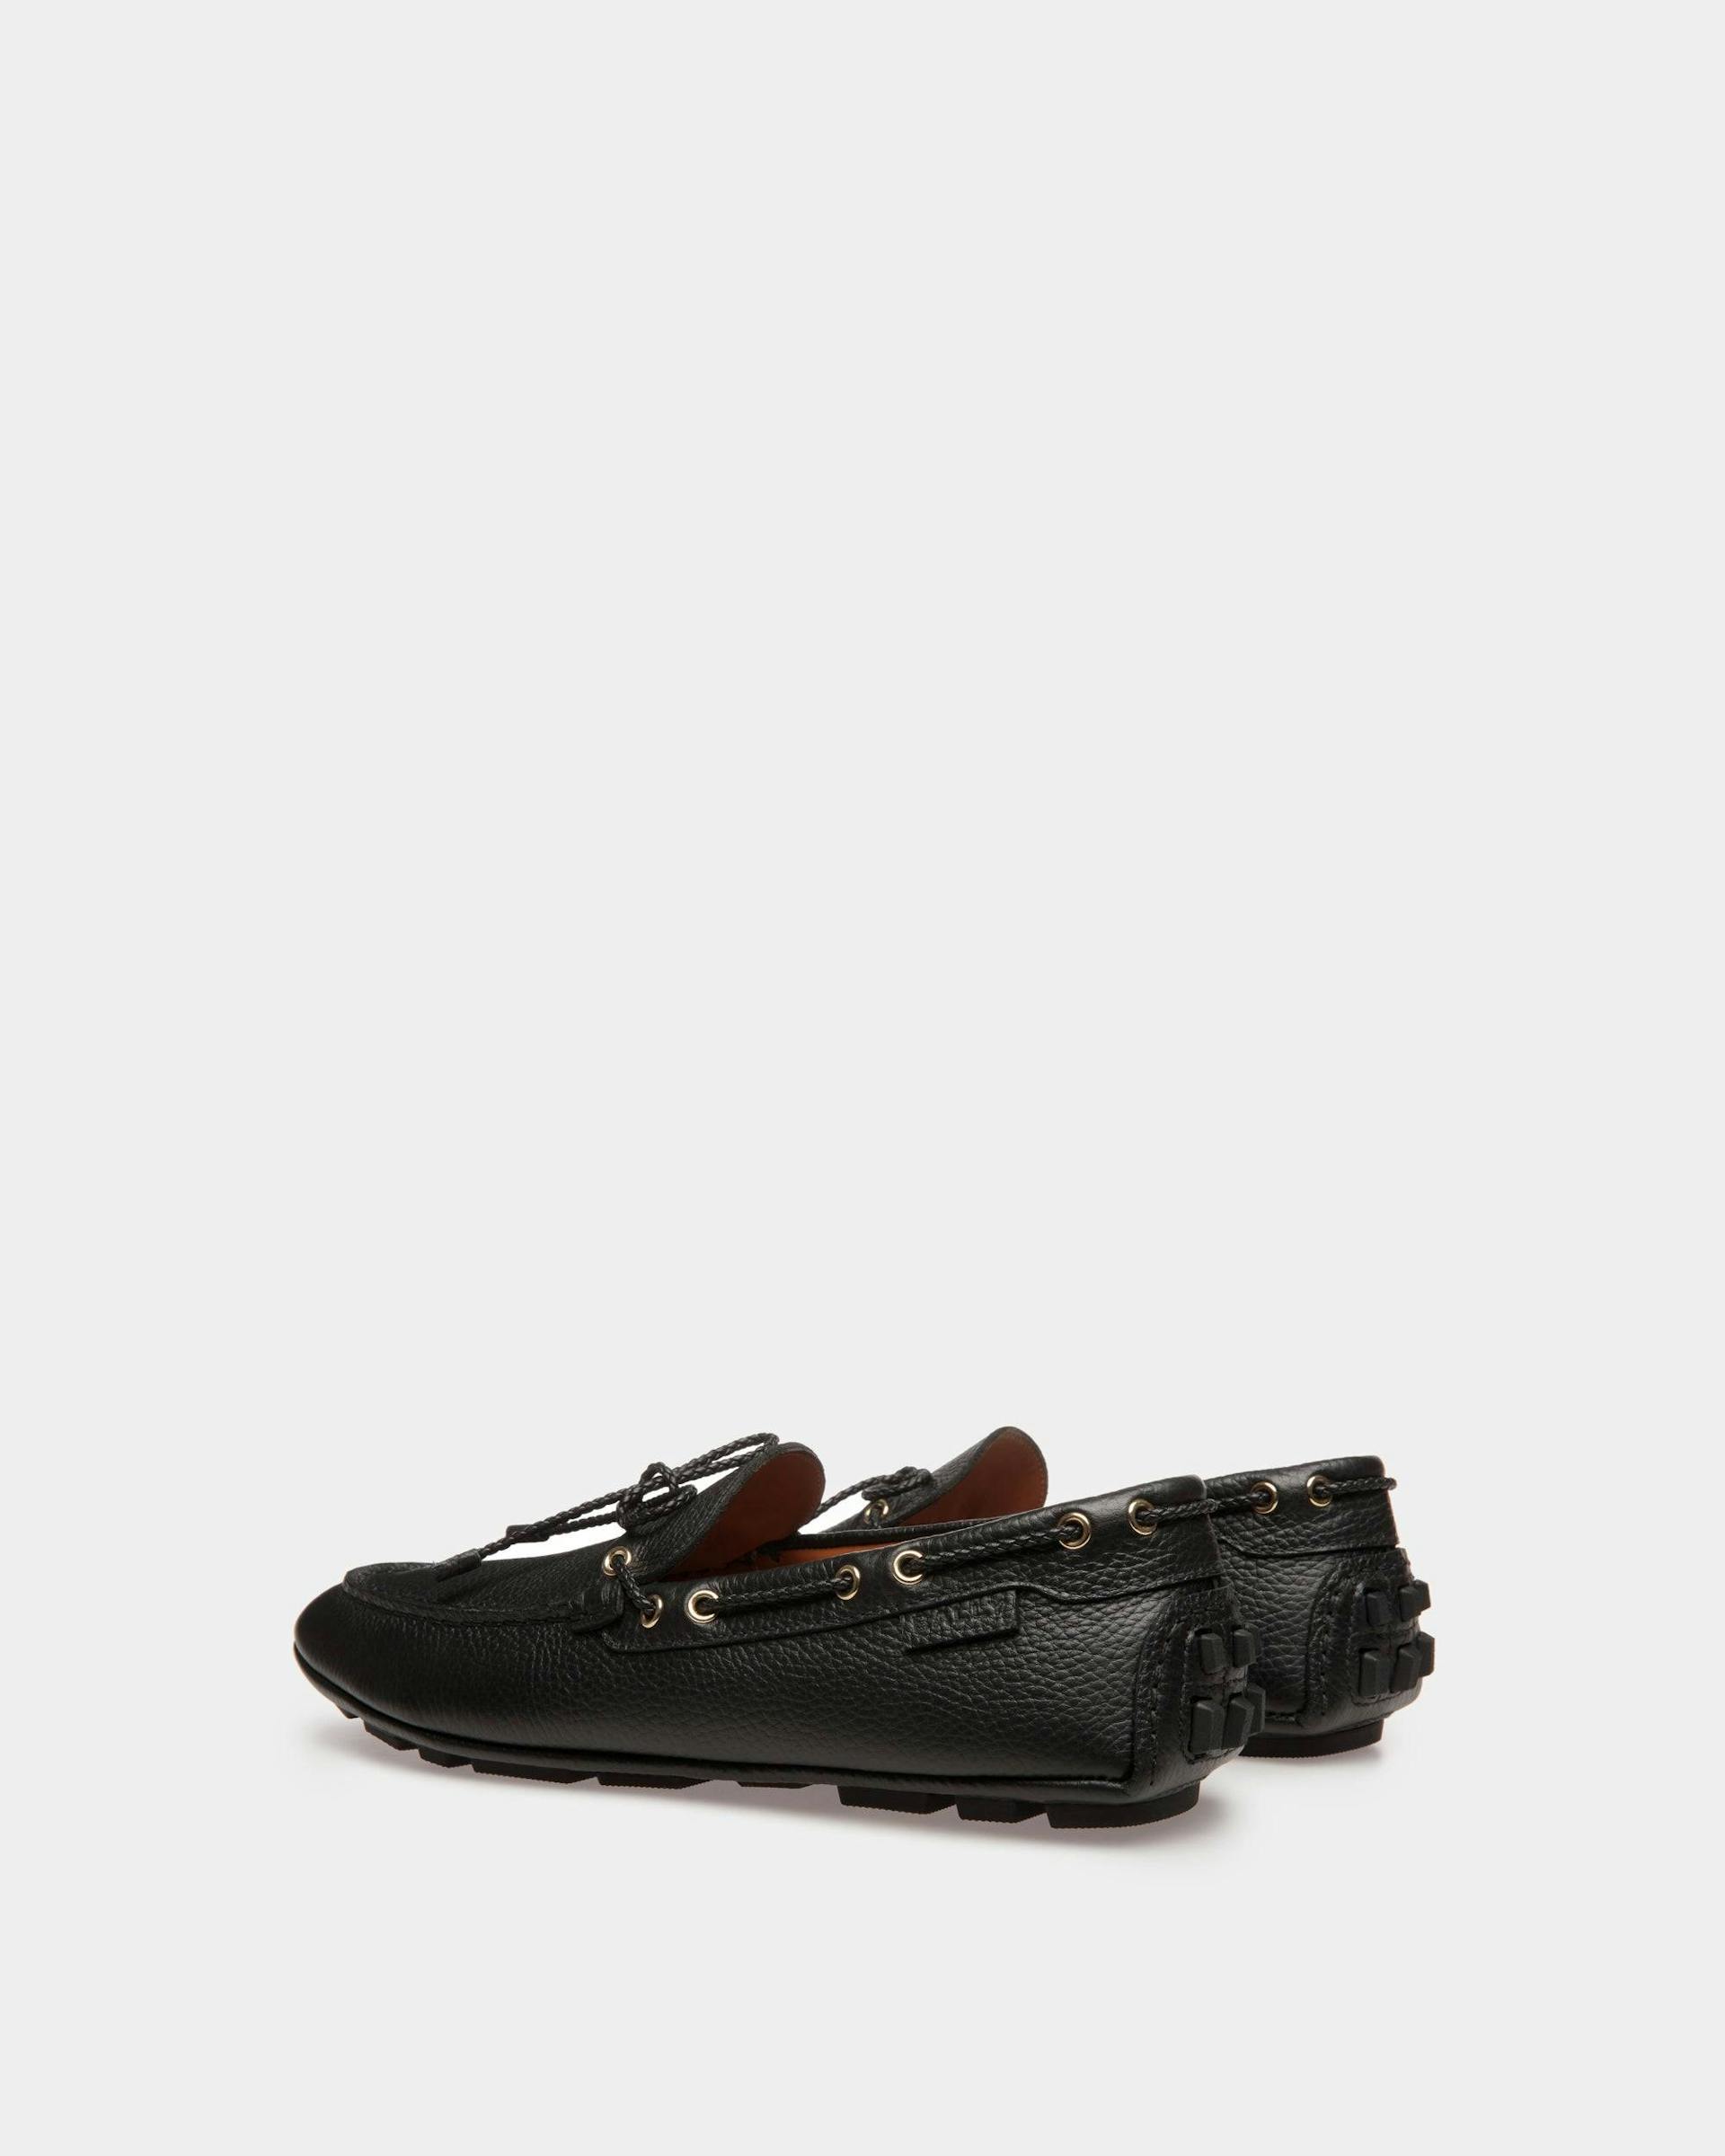 Men's Kerbs Drivers In Black Leather | Bally | Still Life 3/4 Back